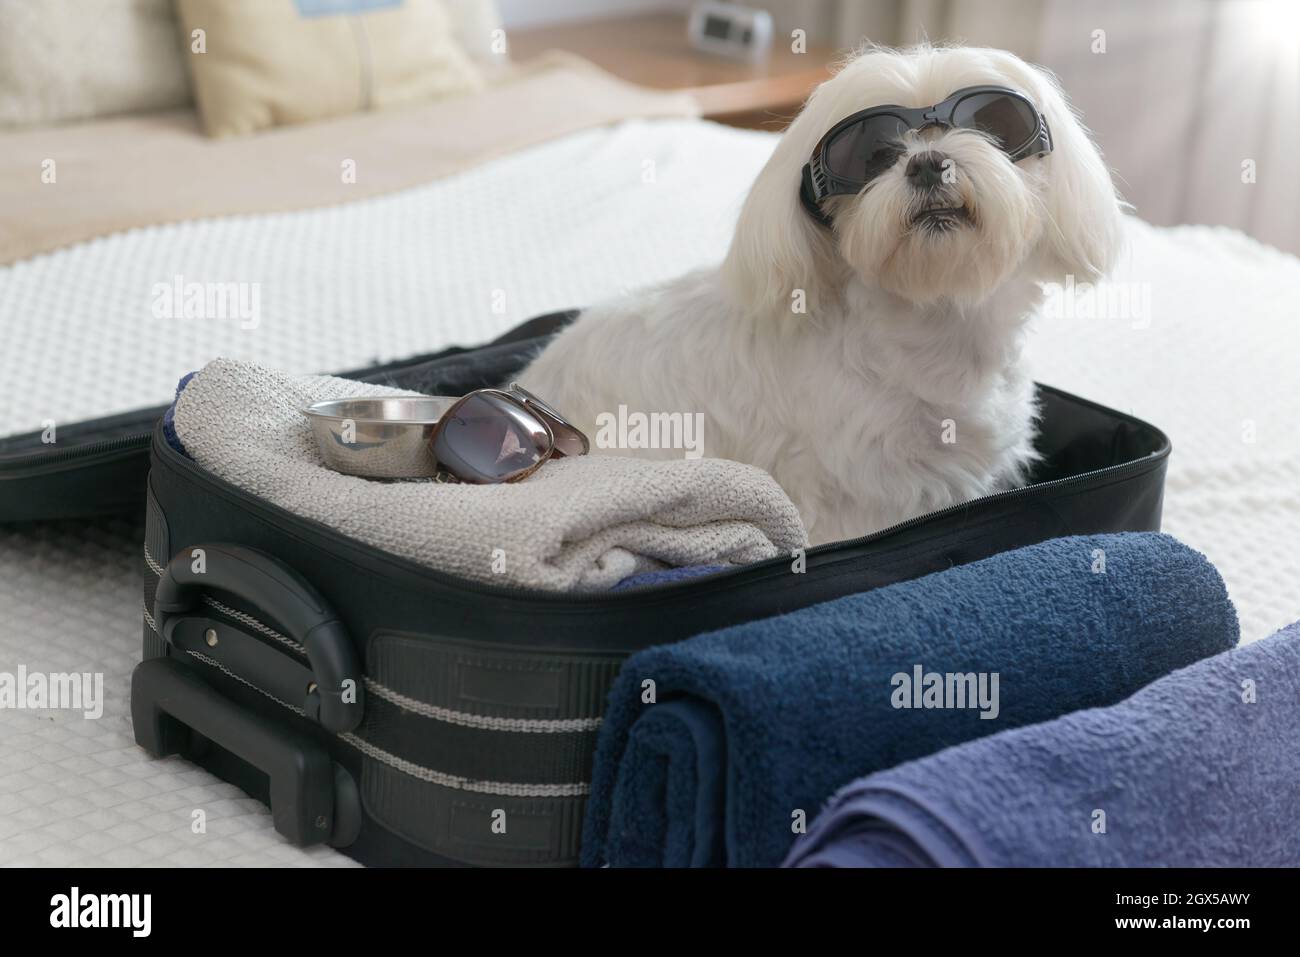 Small dog maltese sitting in the suitcase or bag wearing sunglasses and waiting for a trip Stock Photo